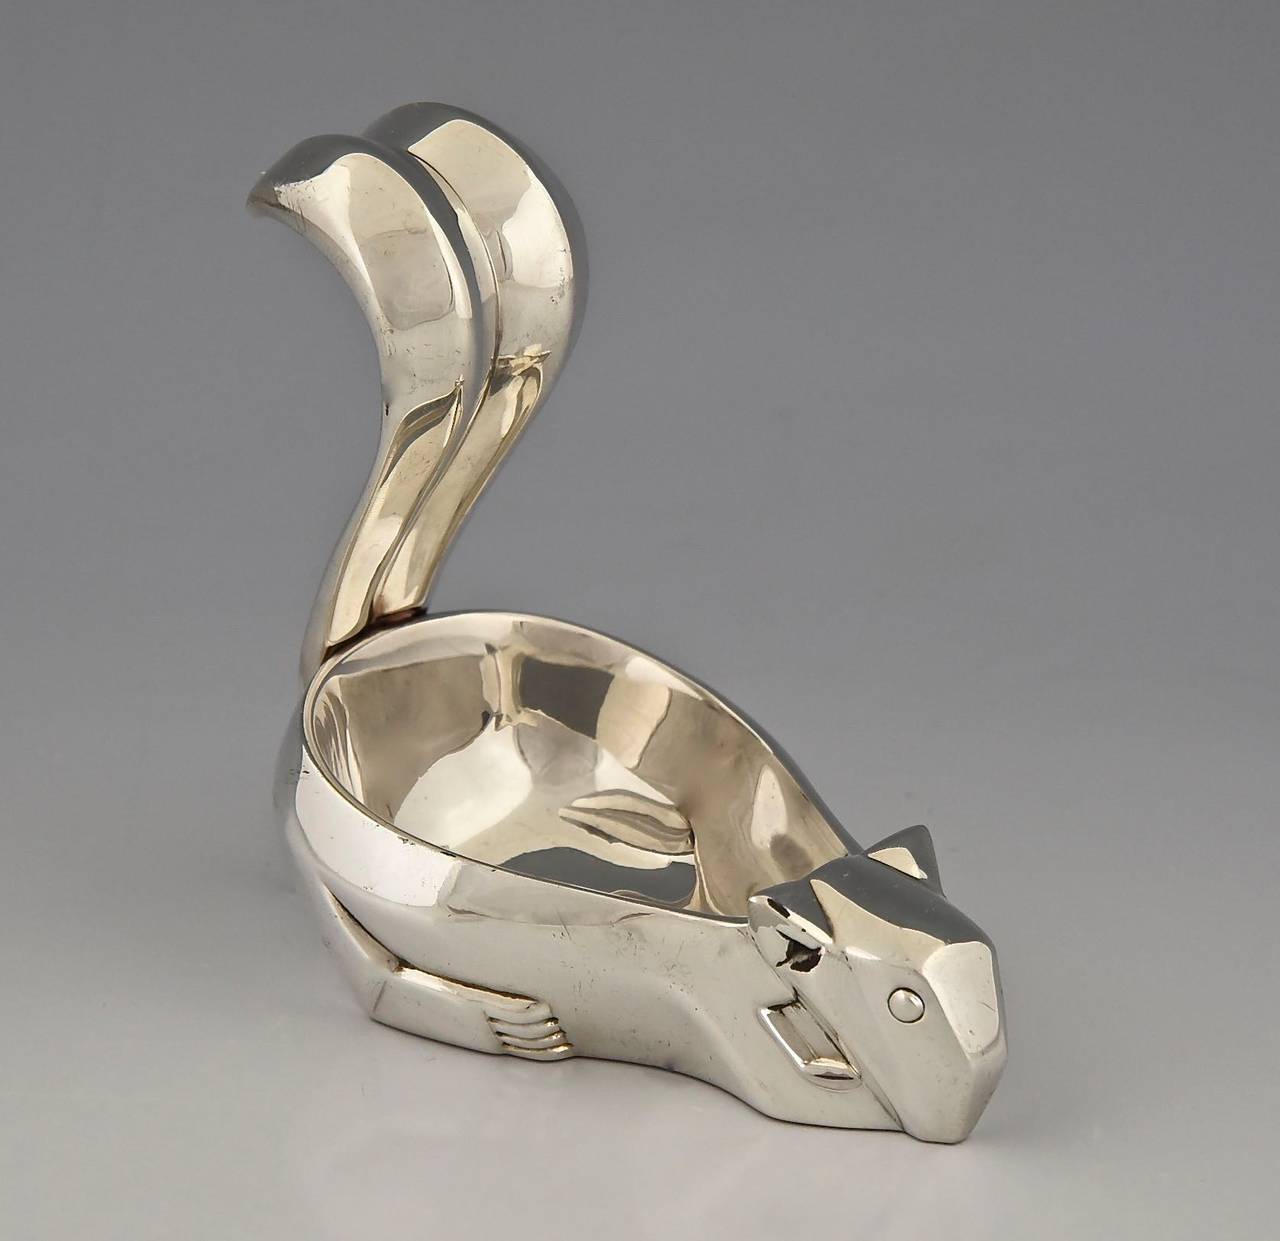 Art Deco nut dish modeled as a squirrel.
 Designed by Antoinette de Ribes (1892-1972) in 1931.  
Executed by Christofle in the 1980s. 

Marks:  Christofle marks.
Style:  Art Deco. 
Date:  Design 1931. 

Material:  Silver plated metal.